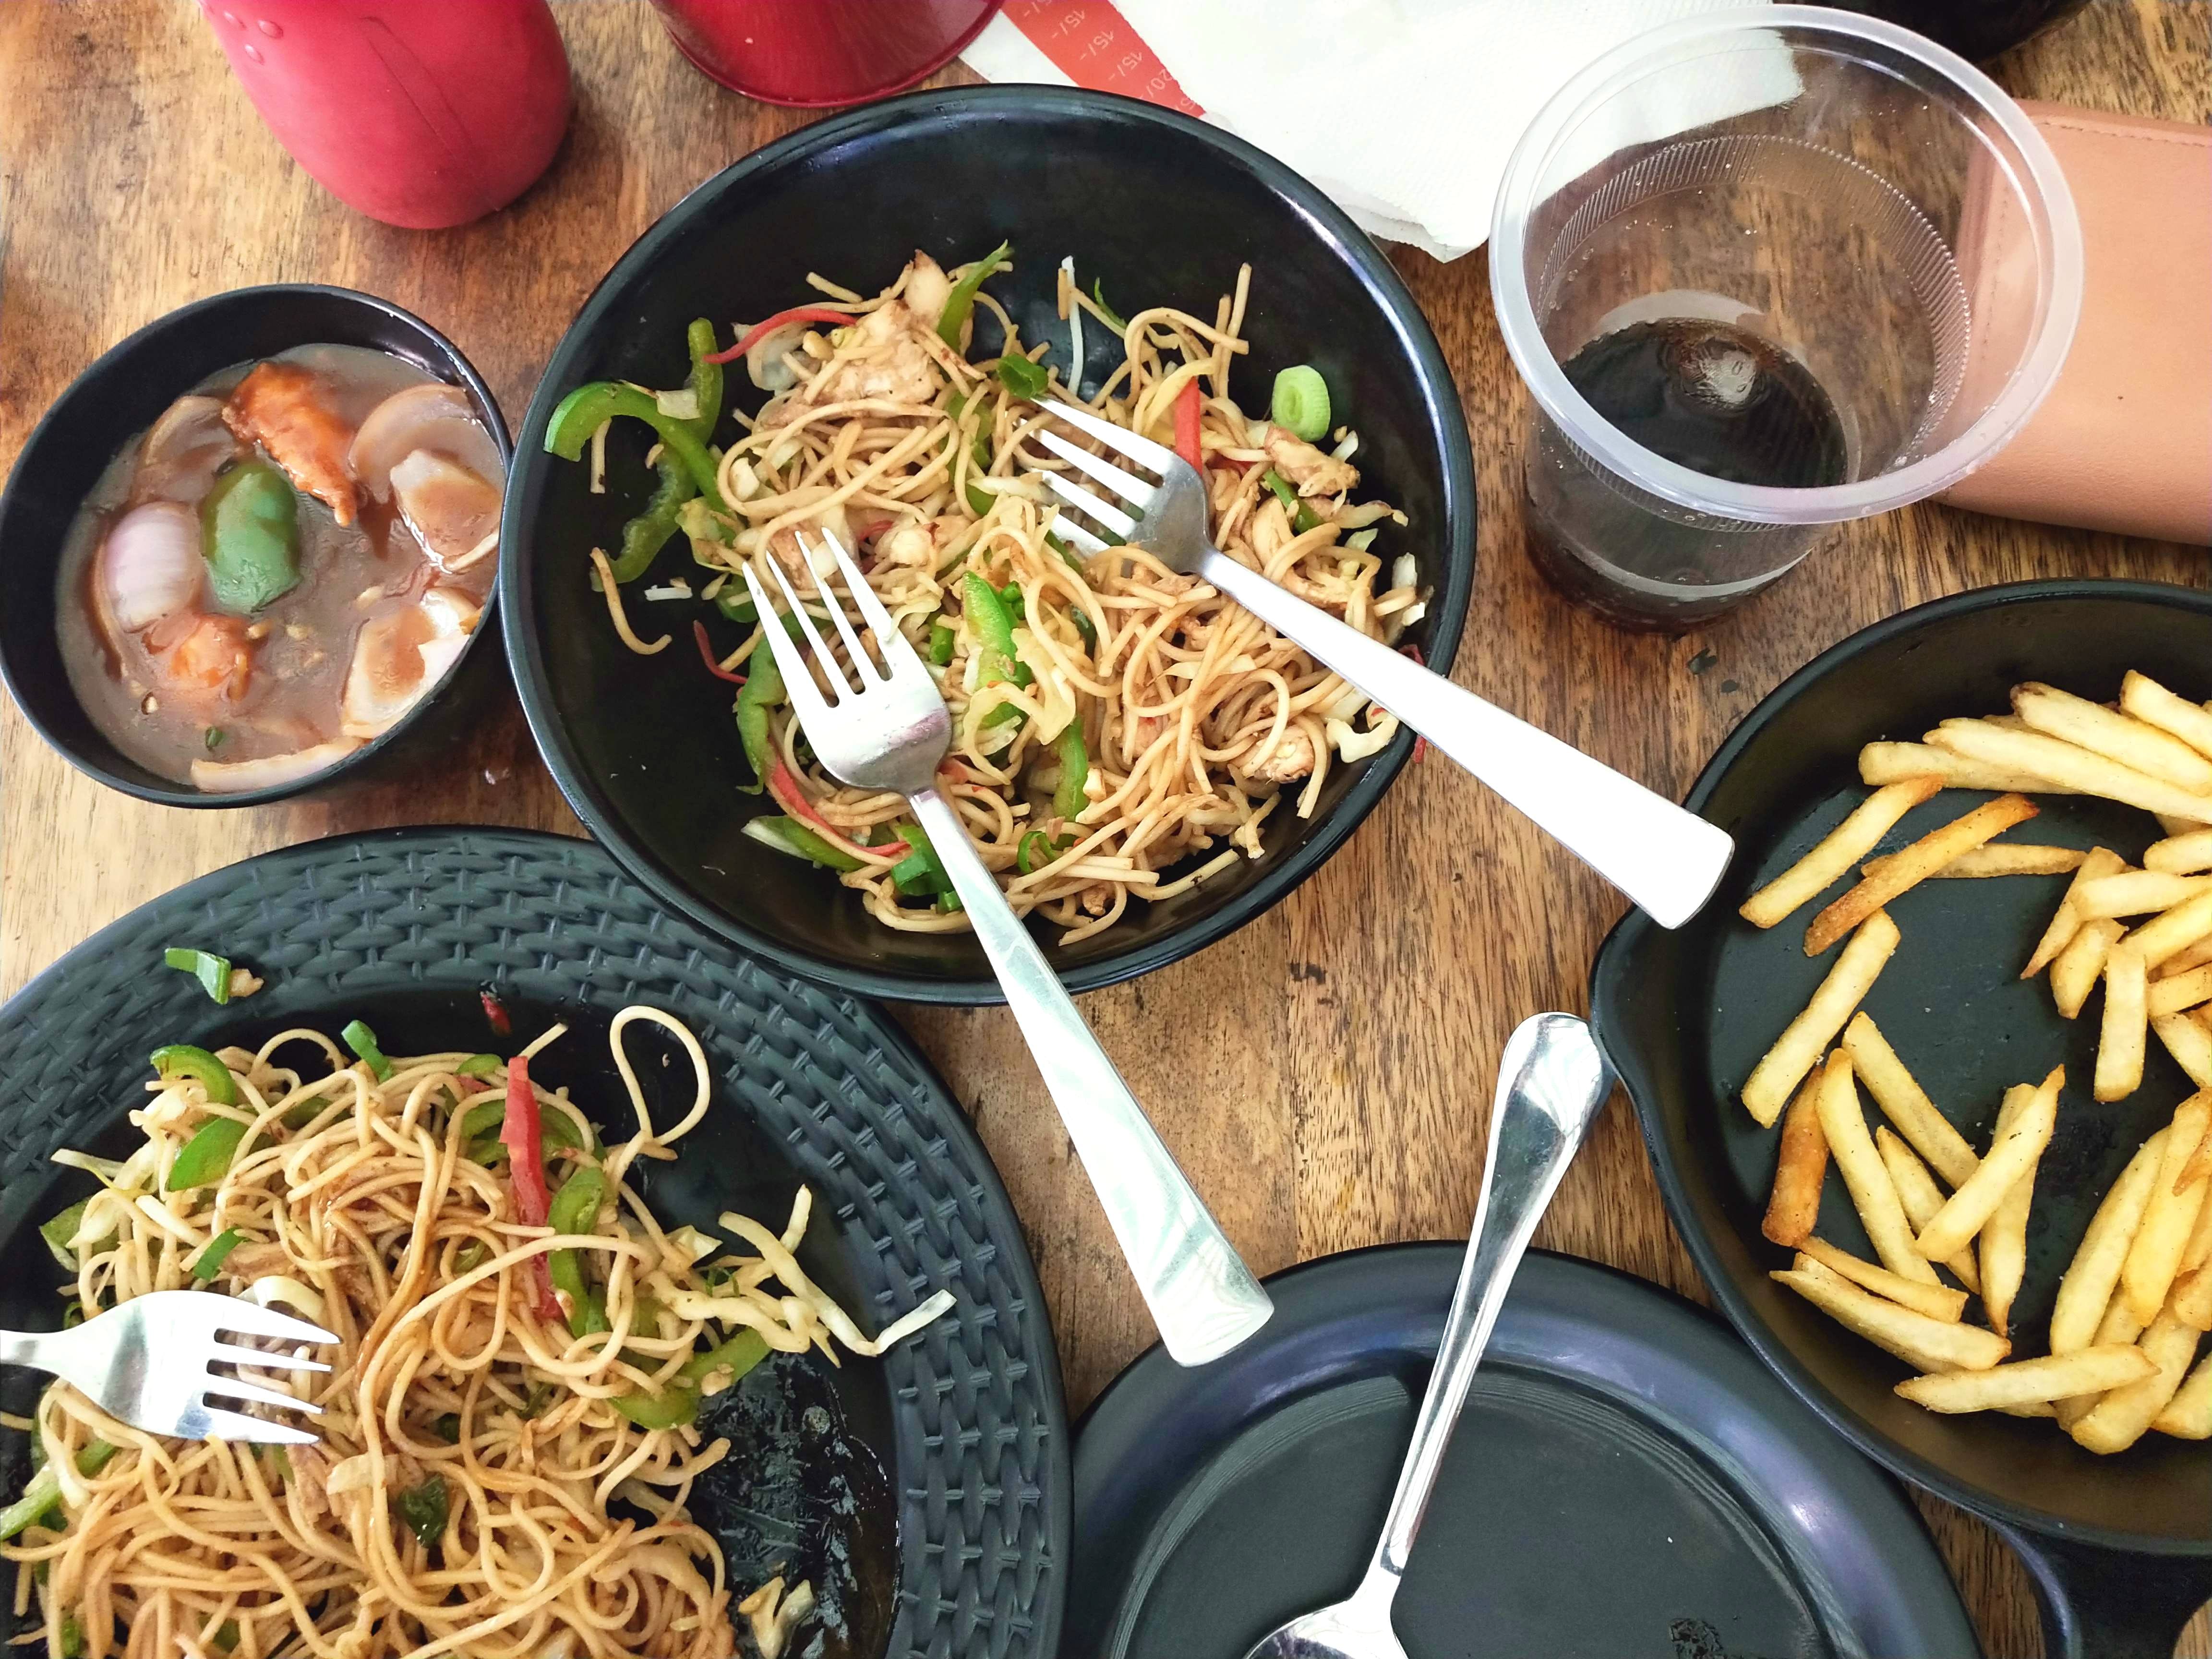 Dish,Food,Cuisine,Fried noodles,Pad thai,Chow mein,Noodle,Chinese noodles,Meal,Lo mein